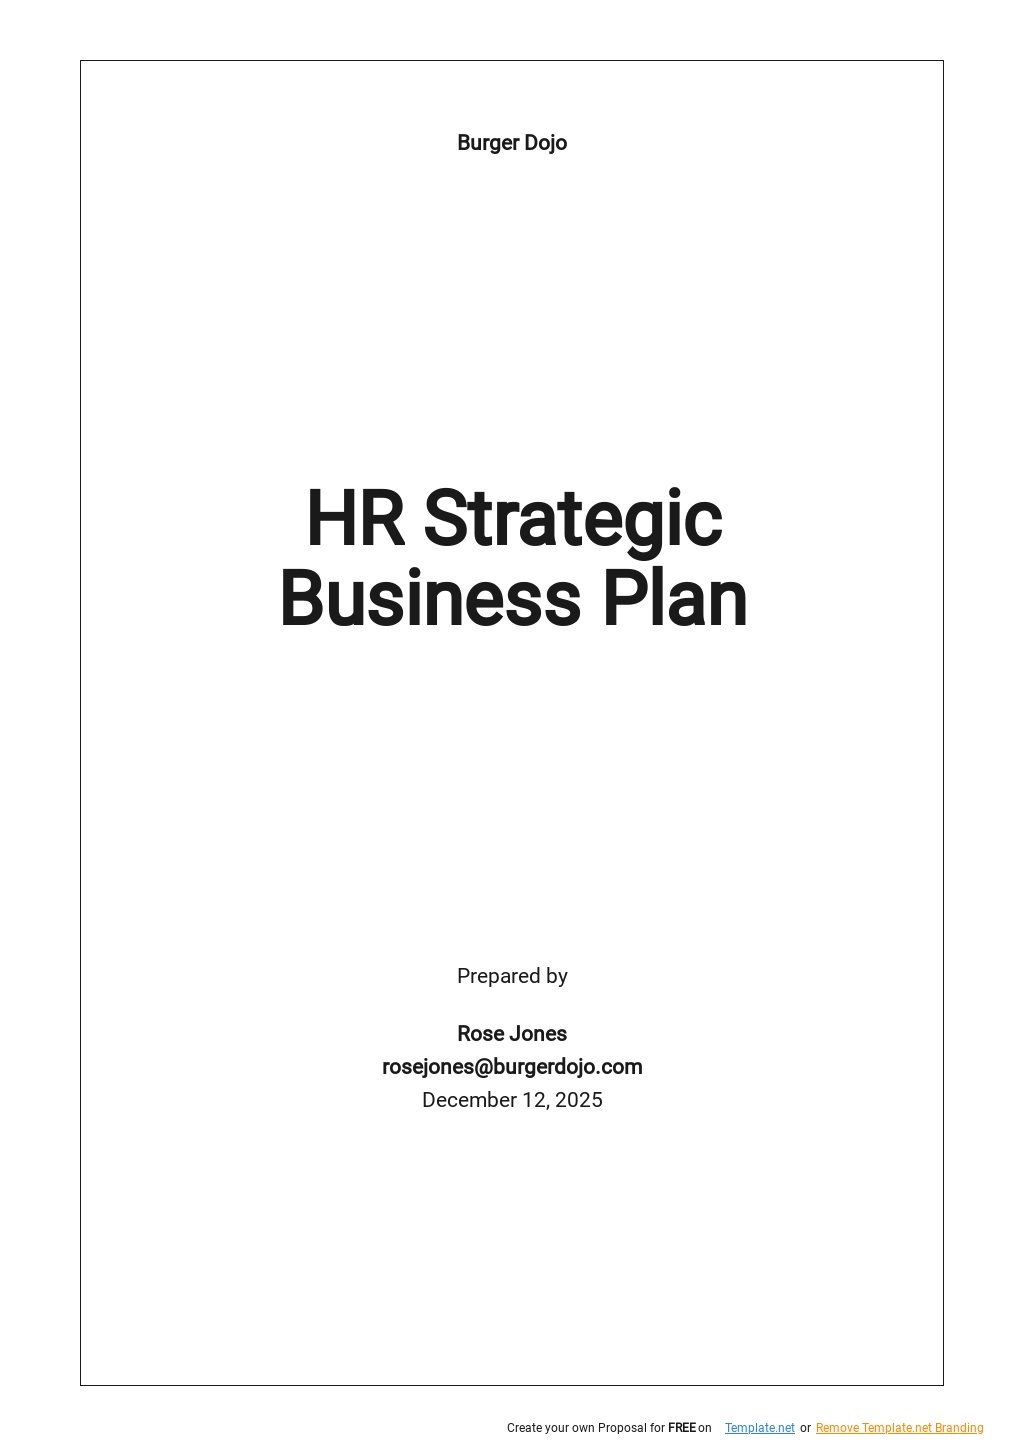 HR Strategic Business Plan Template - Google Docs, Word, Apple Pages ...